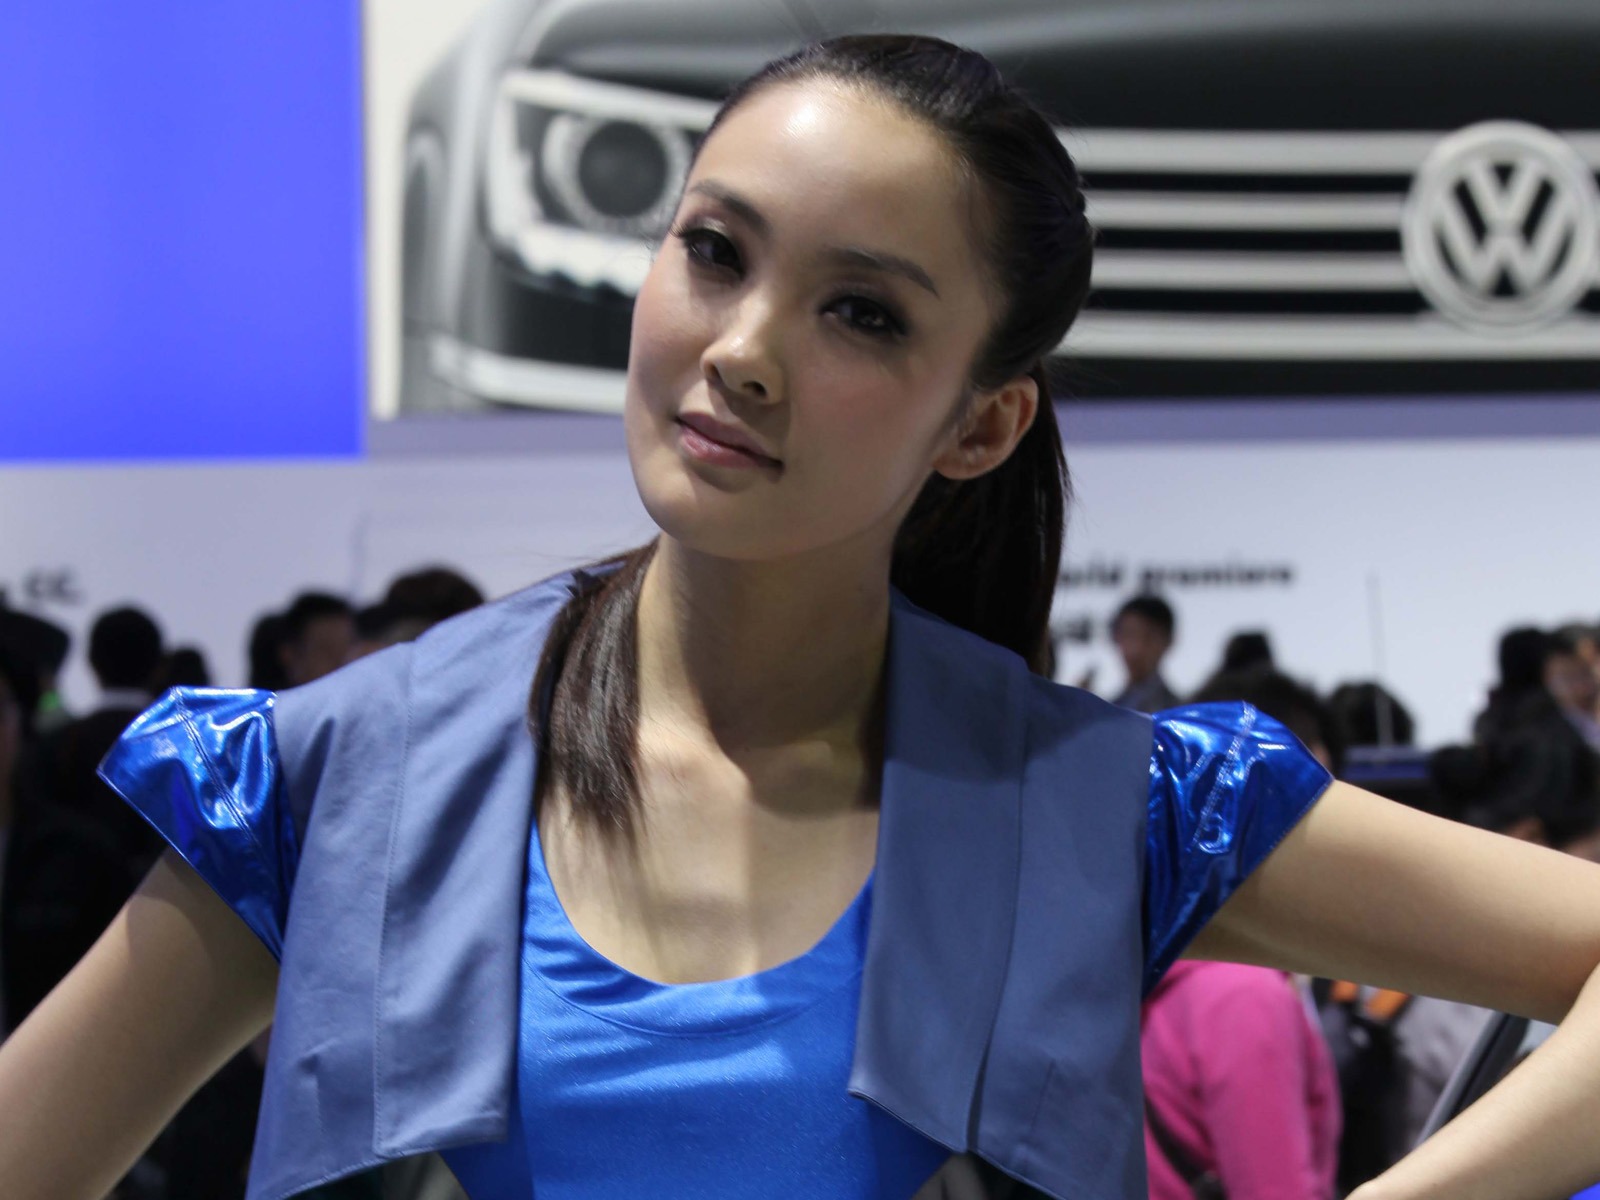 2010 Beijing International Auto Show beauty (2) (the wind chasing the clouds works) #7 - 1600x1200